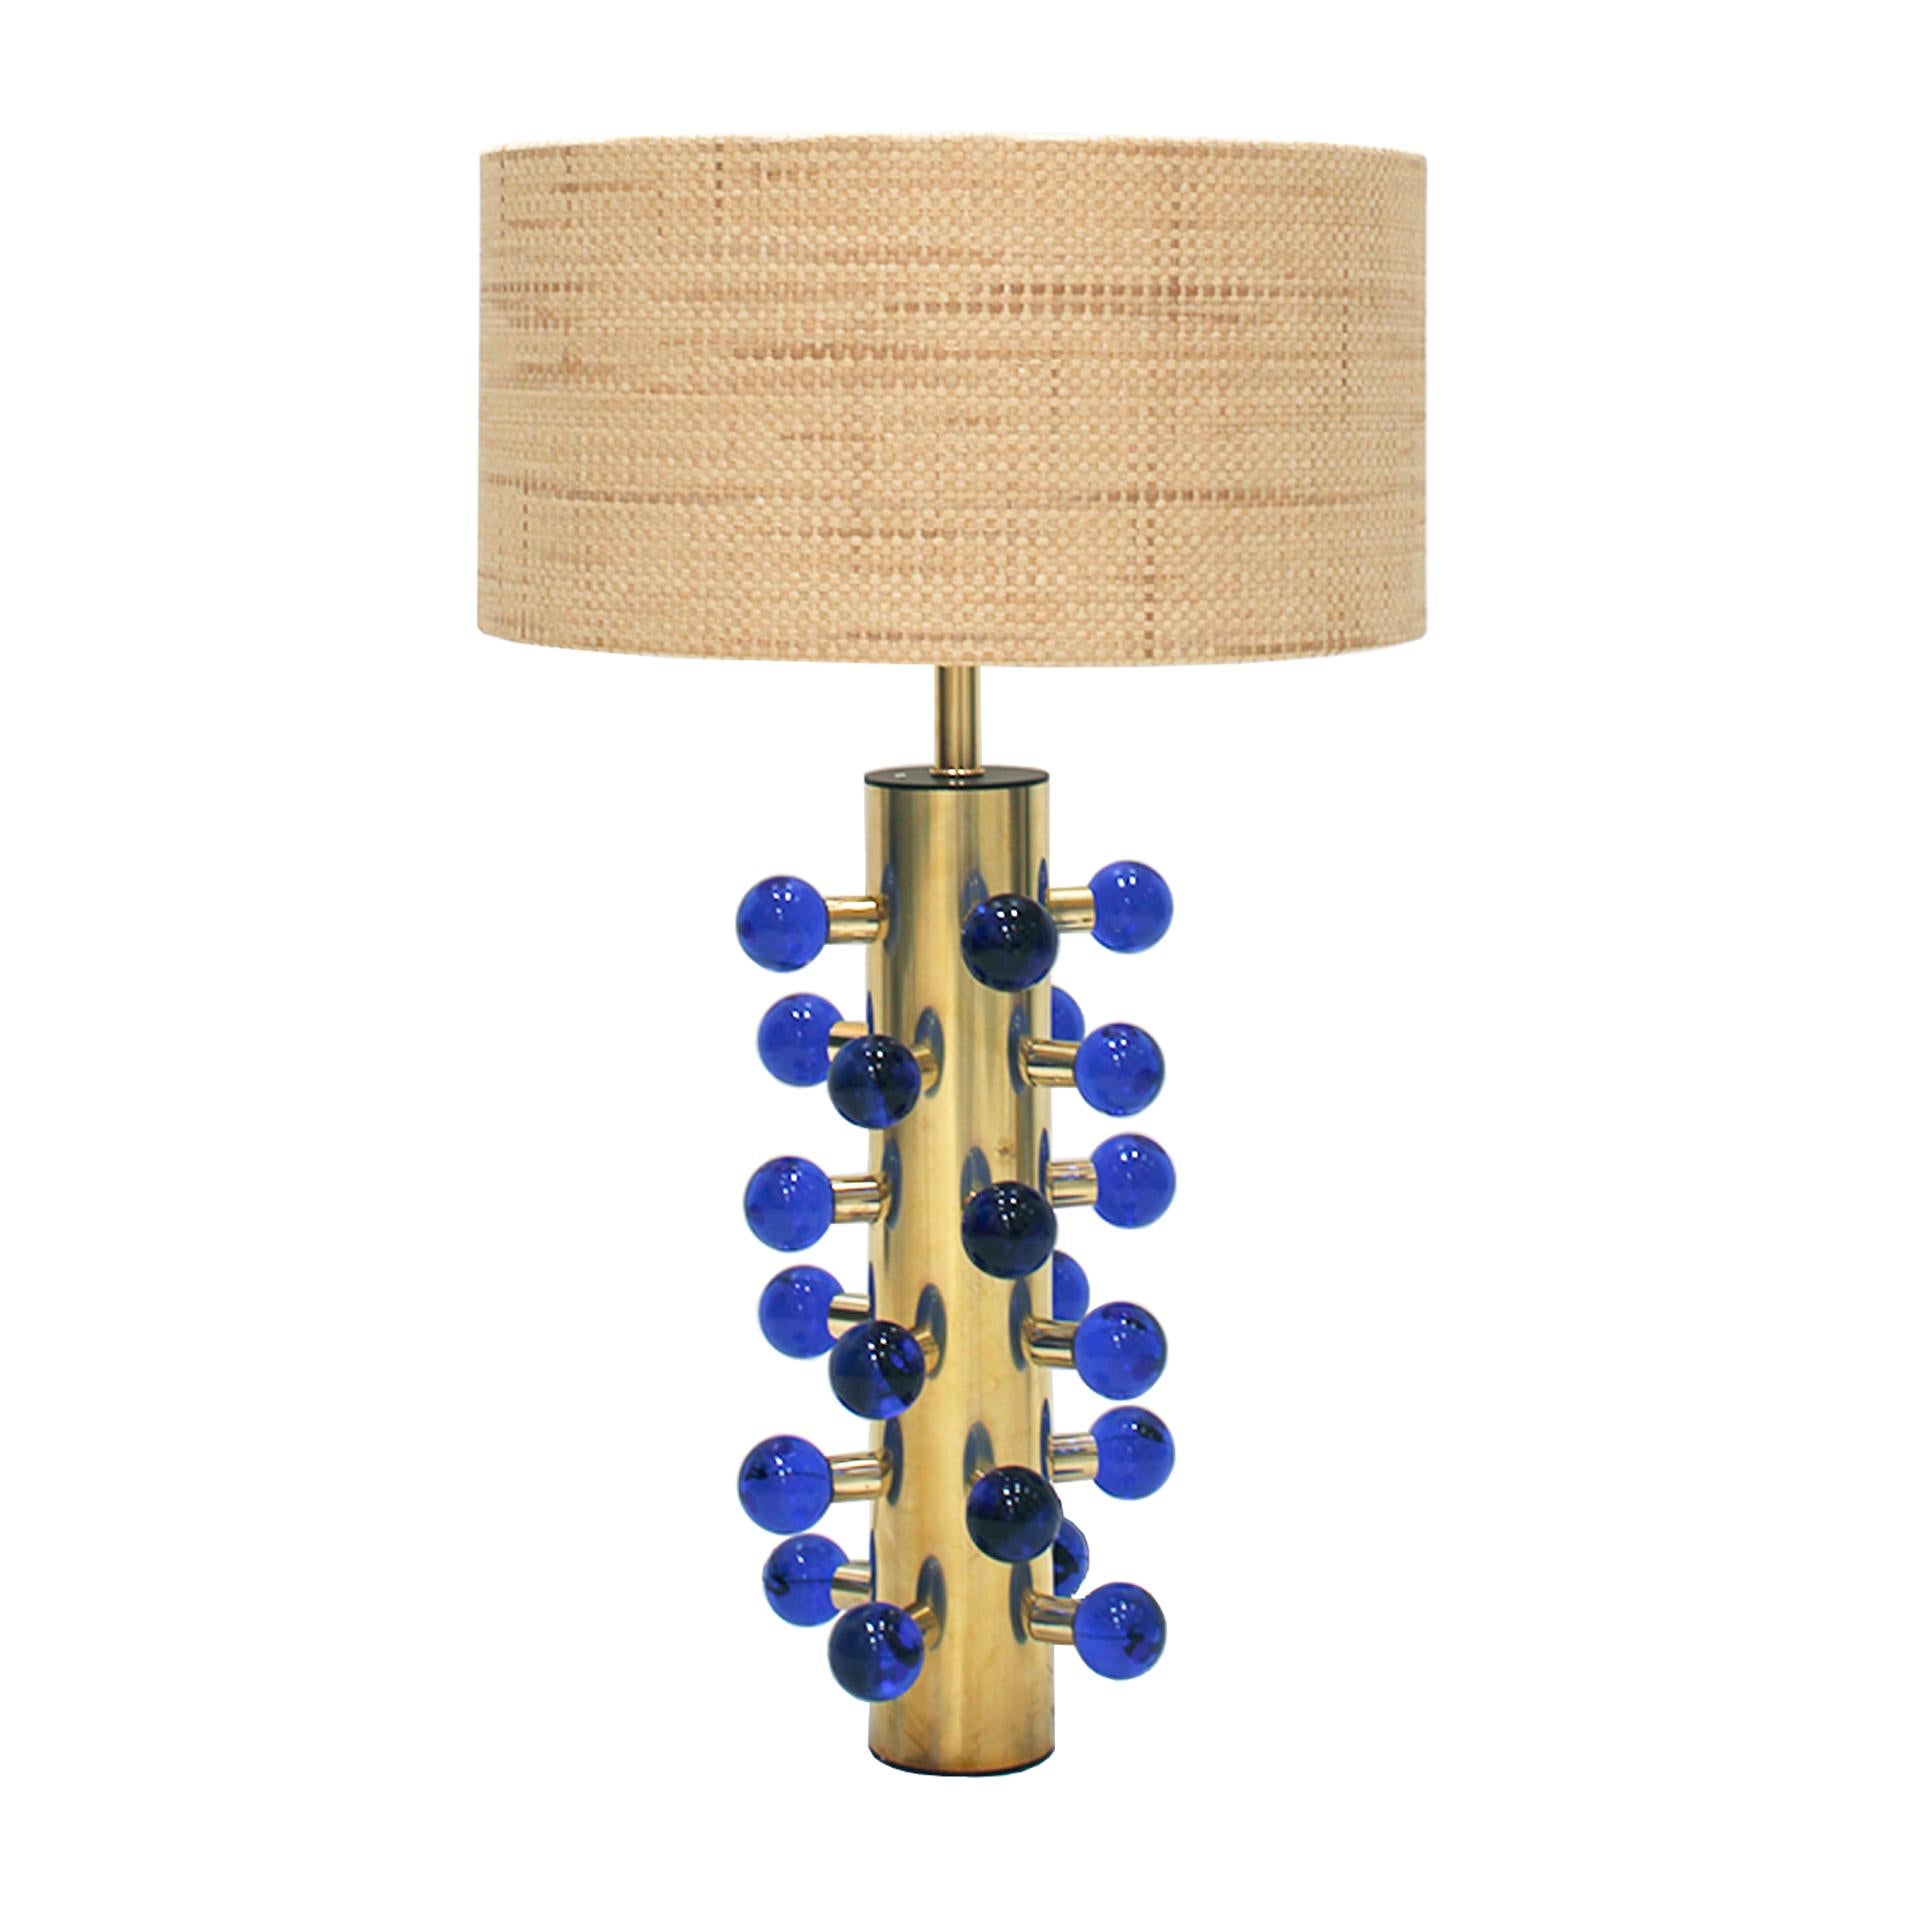 Stunning pair of table lamps designed by L.A. Studio. Structure made of brass with blue Murano glass spherical pieces.

Every item LA Studio offers is checked by our team of 10 craftsmen in our in-house workshop. Special restoration or reupholstery